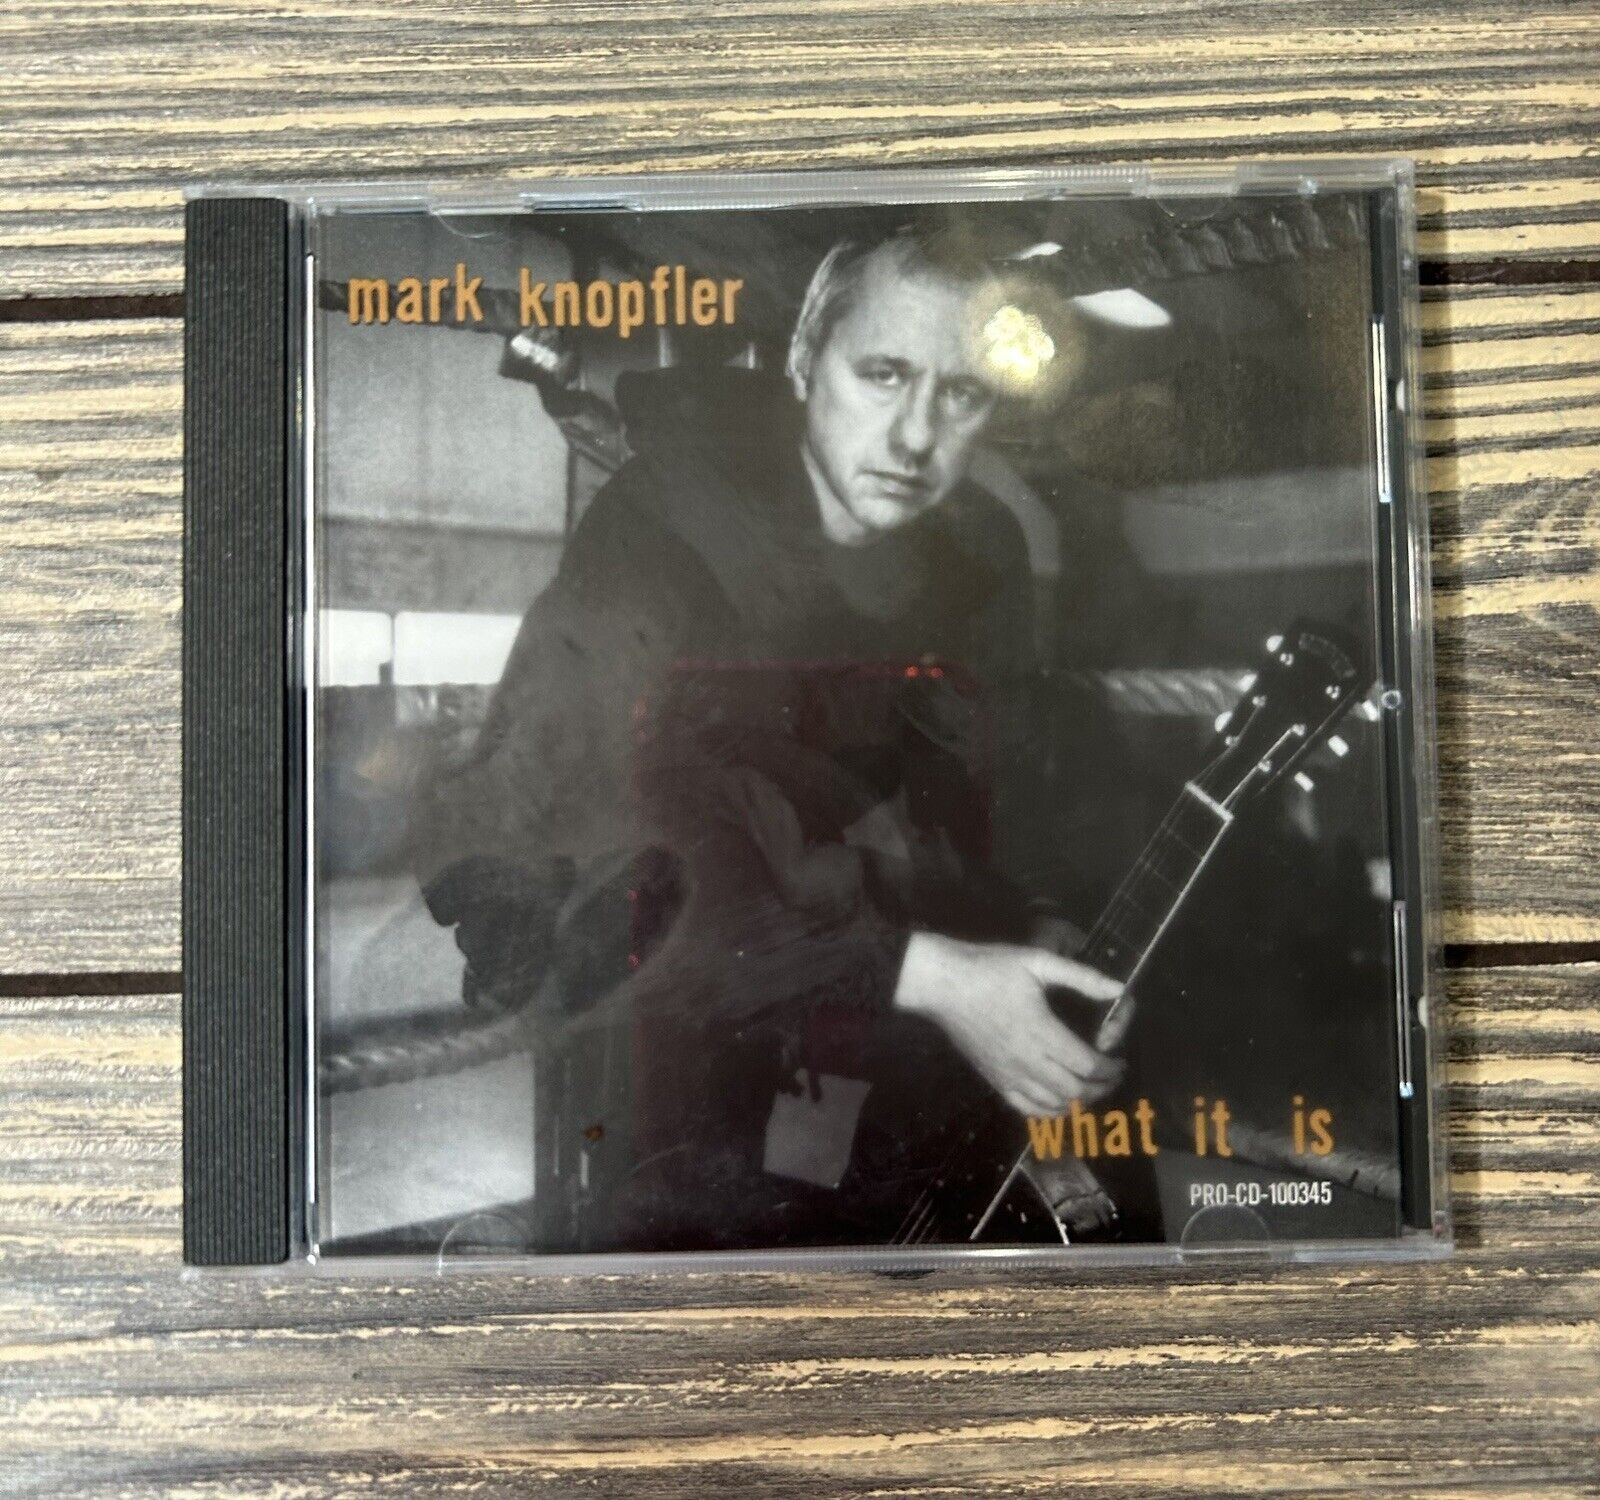 Vintage Mark Knopfler RARE 1 Track PROMO CD single - What It Is [2000]